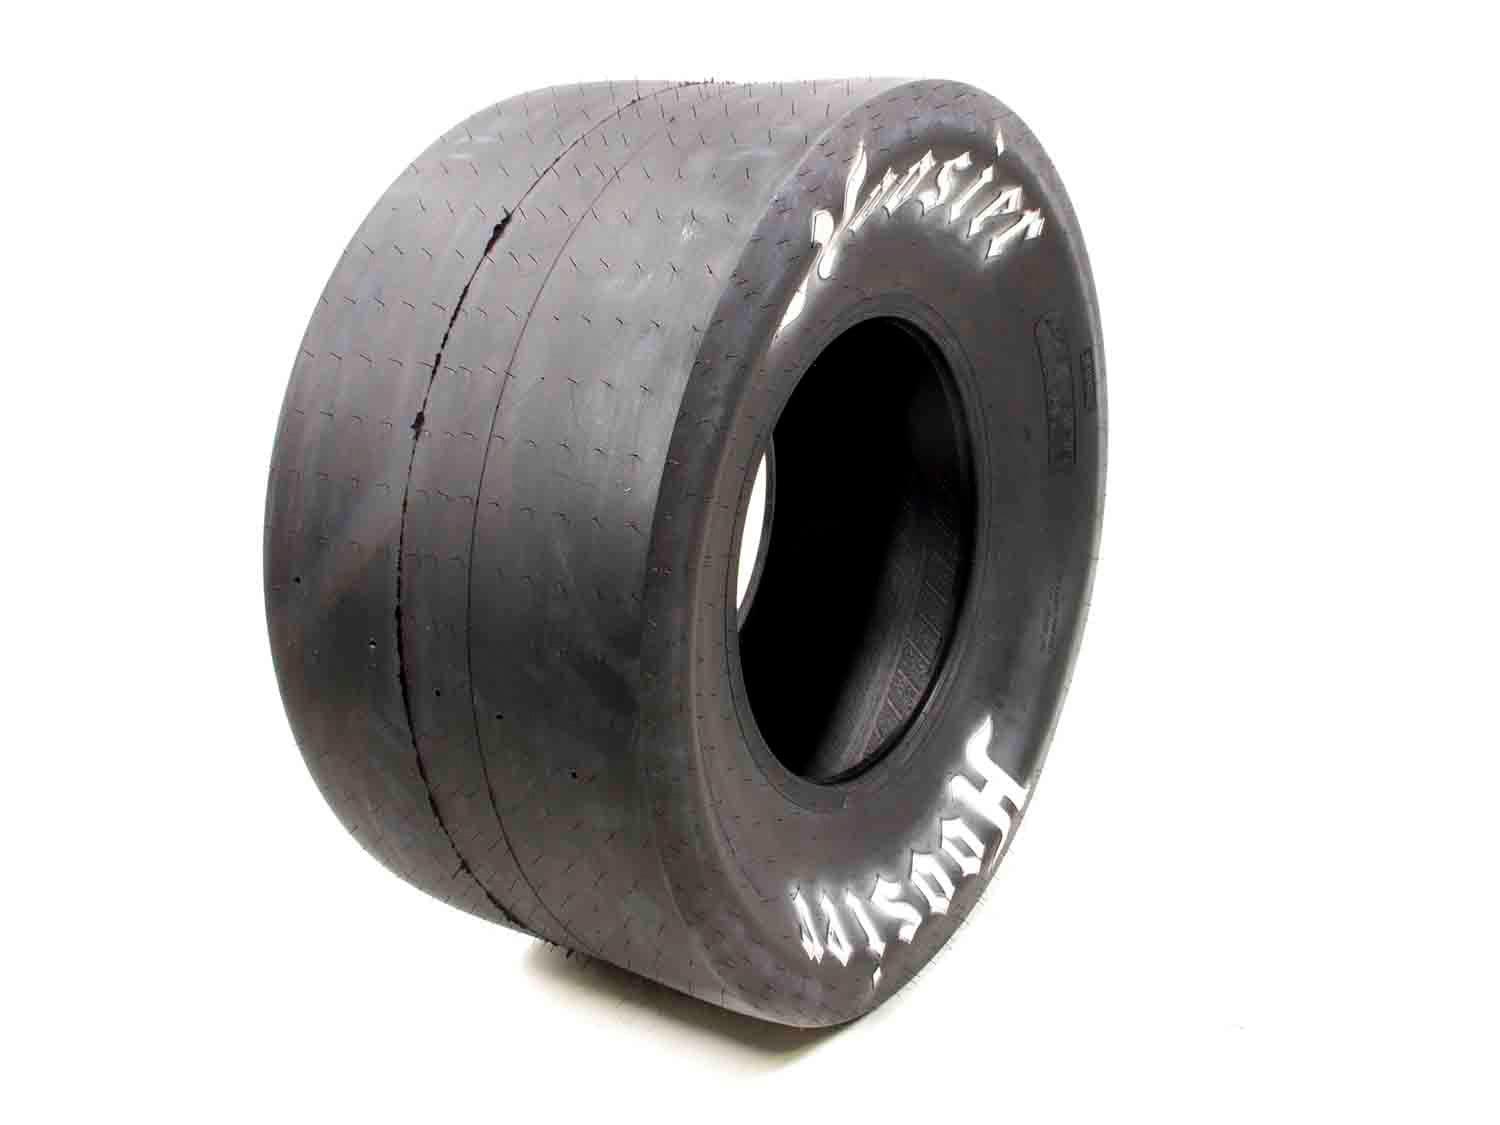 30.0/9-15R Radial Drag Tire - Burlile Performance Products